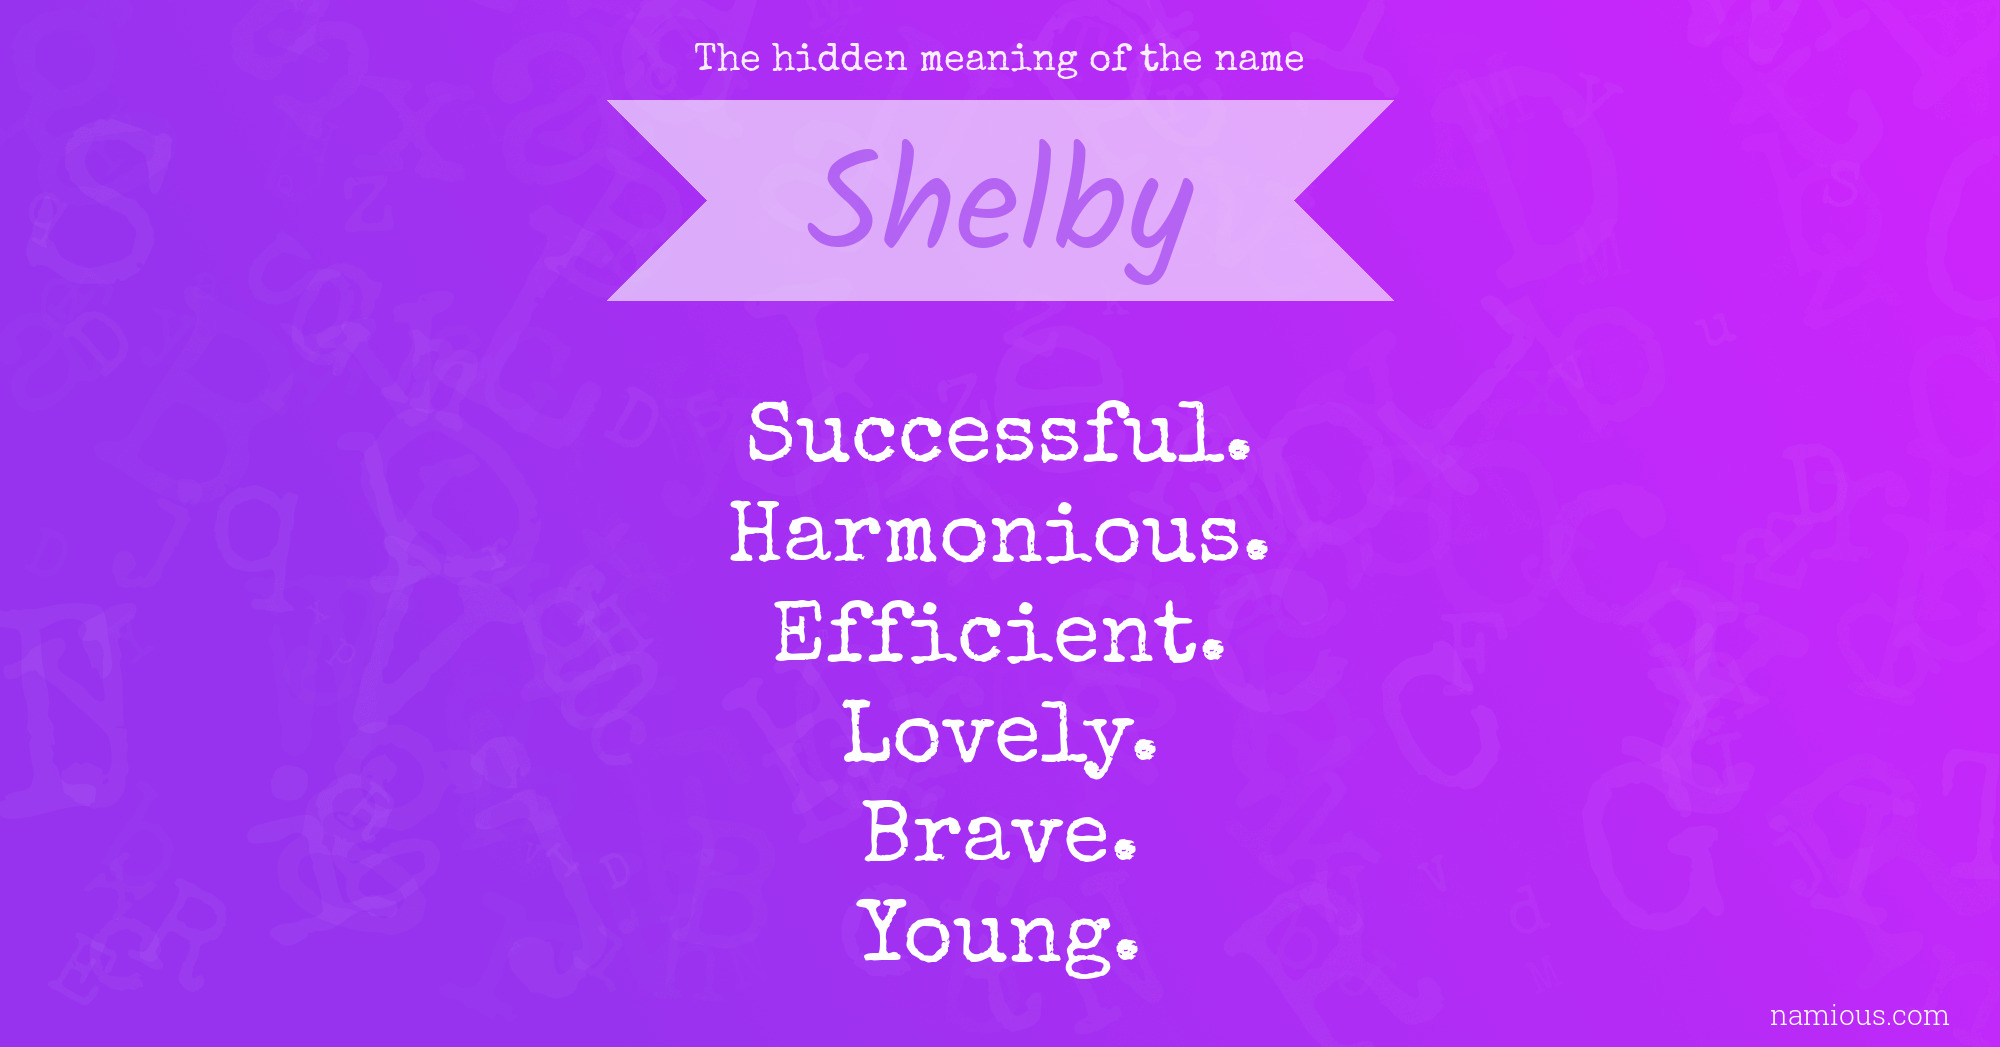 The hidden meaning of the name Shelby